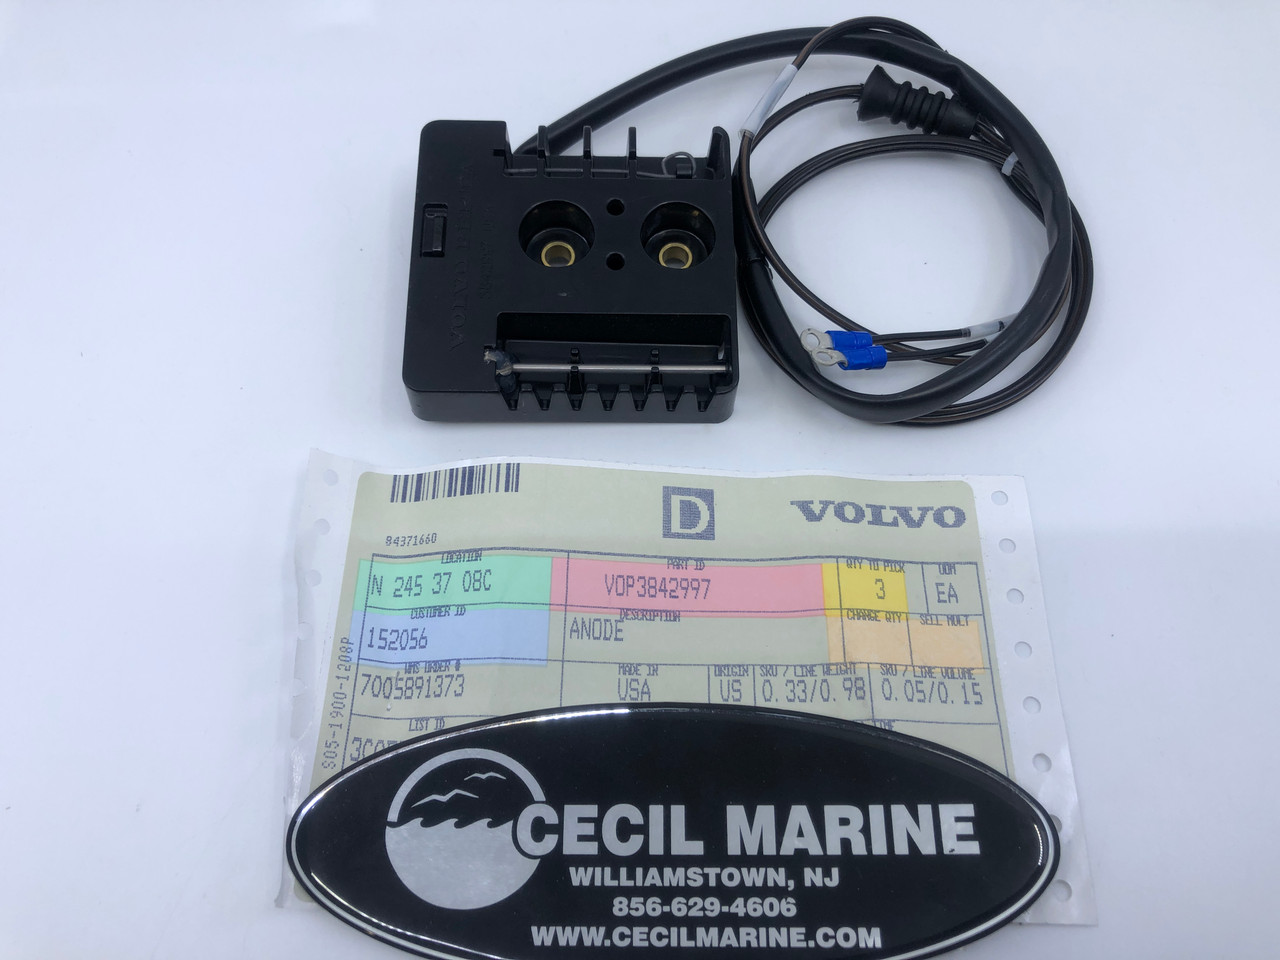 $284.99* GENUINE VOLVO no tax* ANODE 3842997 *In Stock & Ready To Ship!